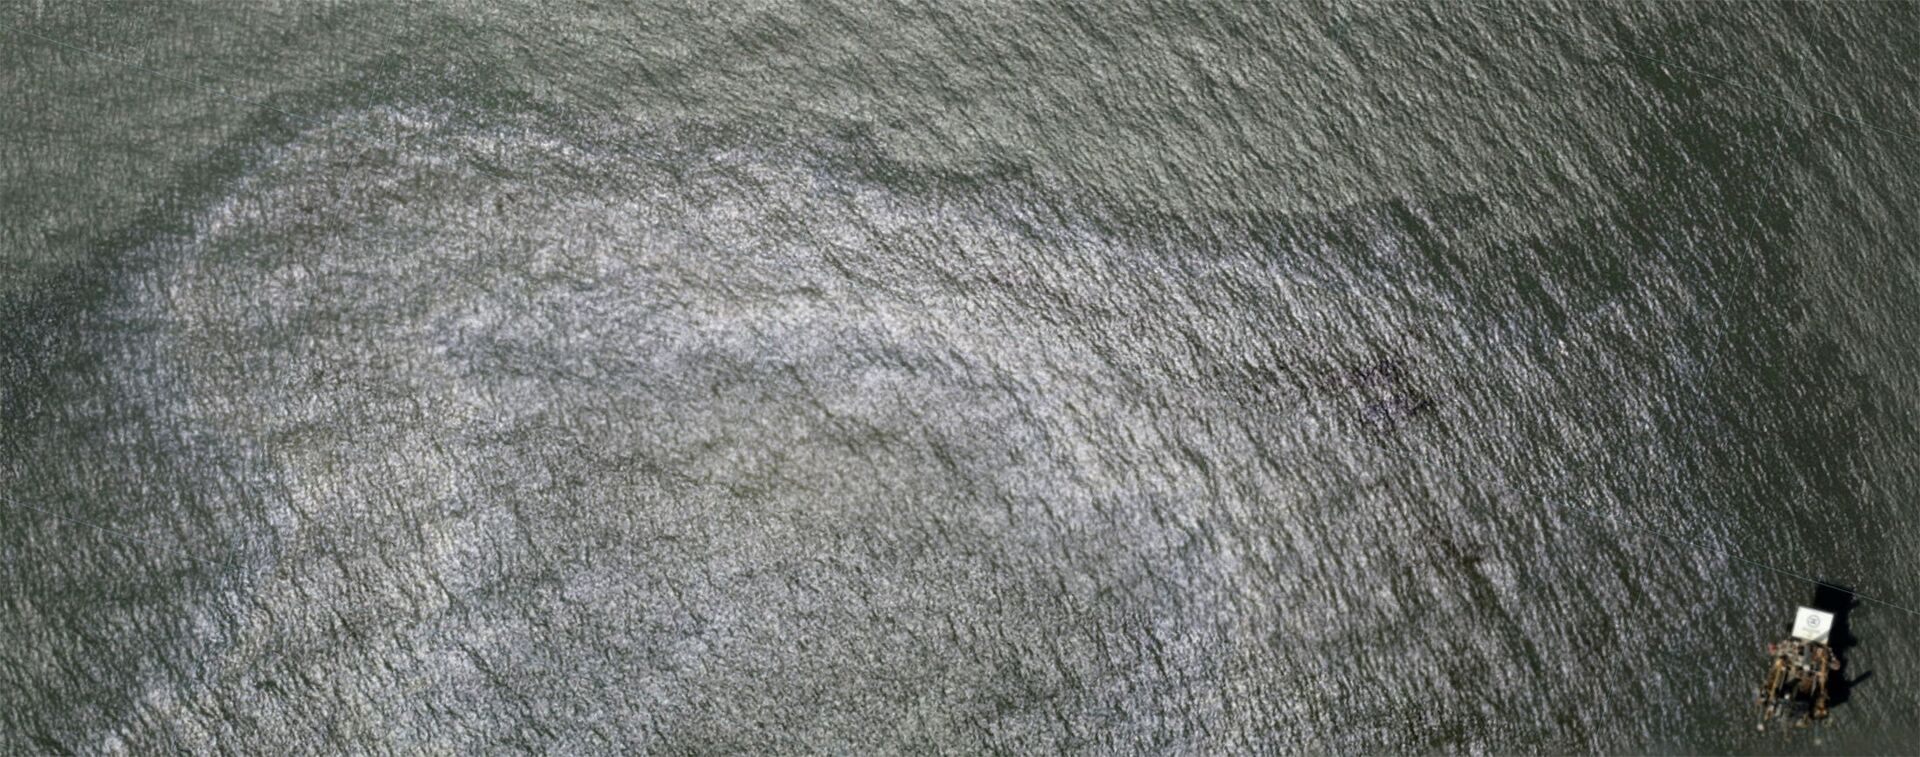 A sheen appears on the waters of the Gulf of Mexico near an oil industry platform, following the passing of Hurricane Ida in an NOAA surveillance photograph taken south of Port Fouchon, Louisiana, U.S. August 31, 2021. - Sputnik International, 1920, 07.09.2021